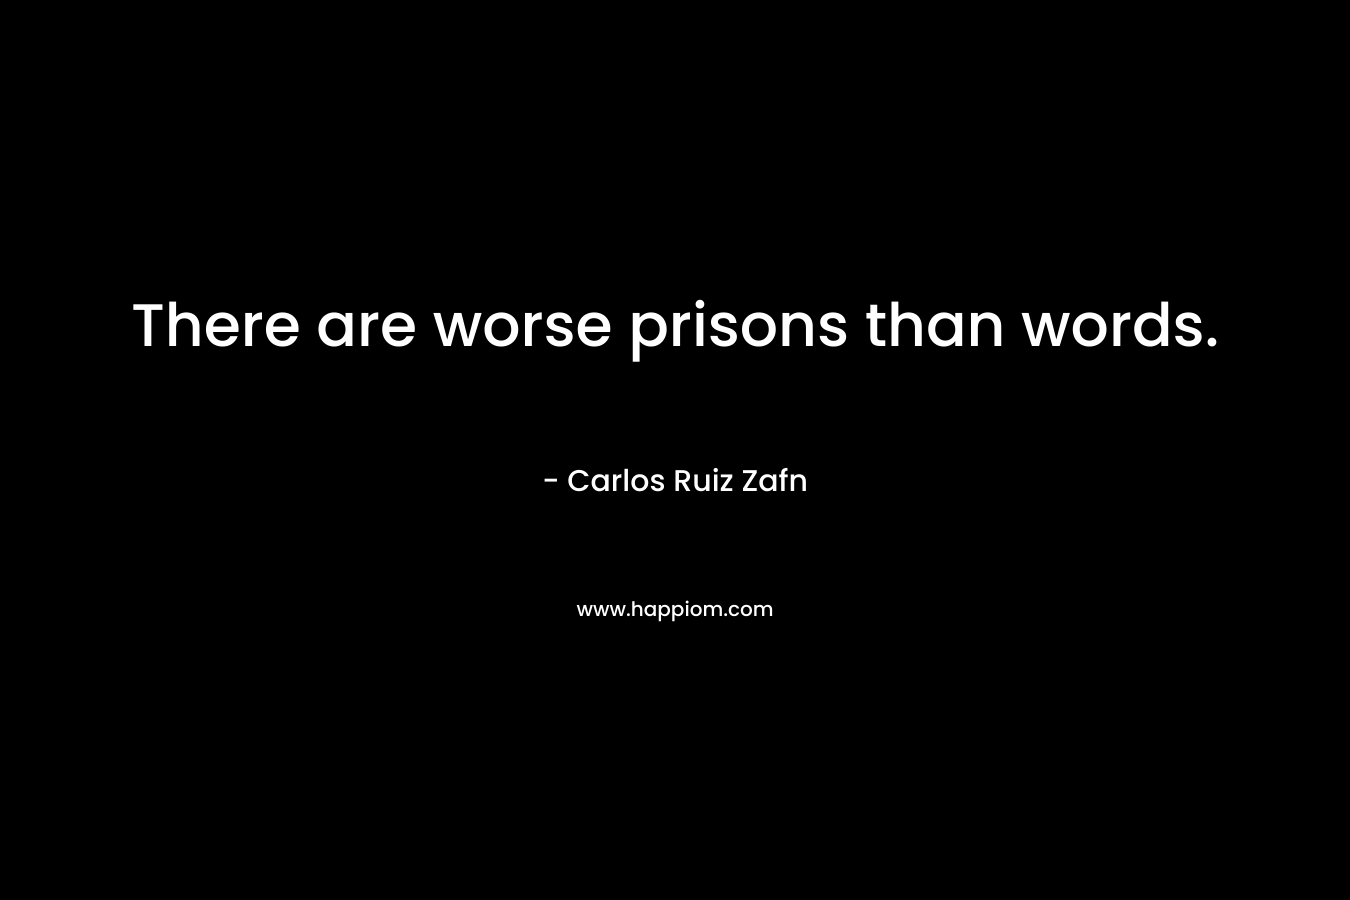 There are worse prisons than words.